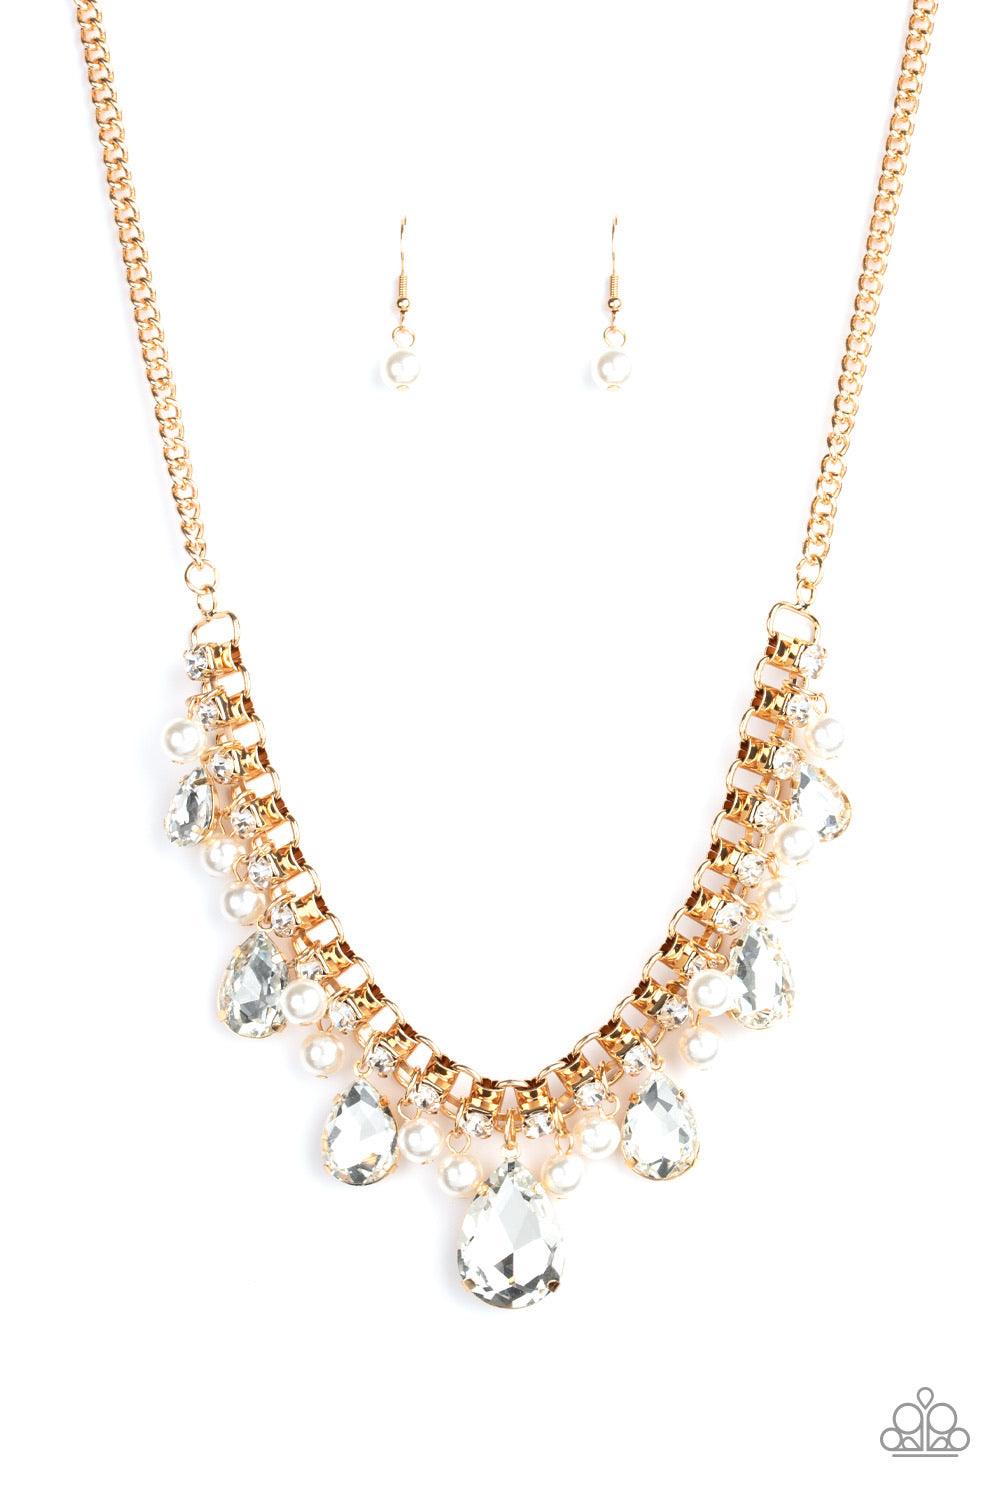 Paparazzi Accessories Knockout Queen - Gold A glamorous collection of bubbly white pearls and exaggerated white teardrop gems dangle from a bold strand of white rhinestones, creating a knockout fringe below the collar. Features an adjustable clasp closure